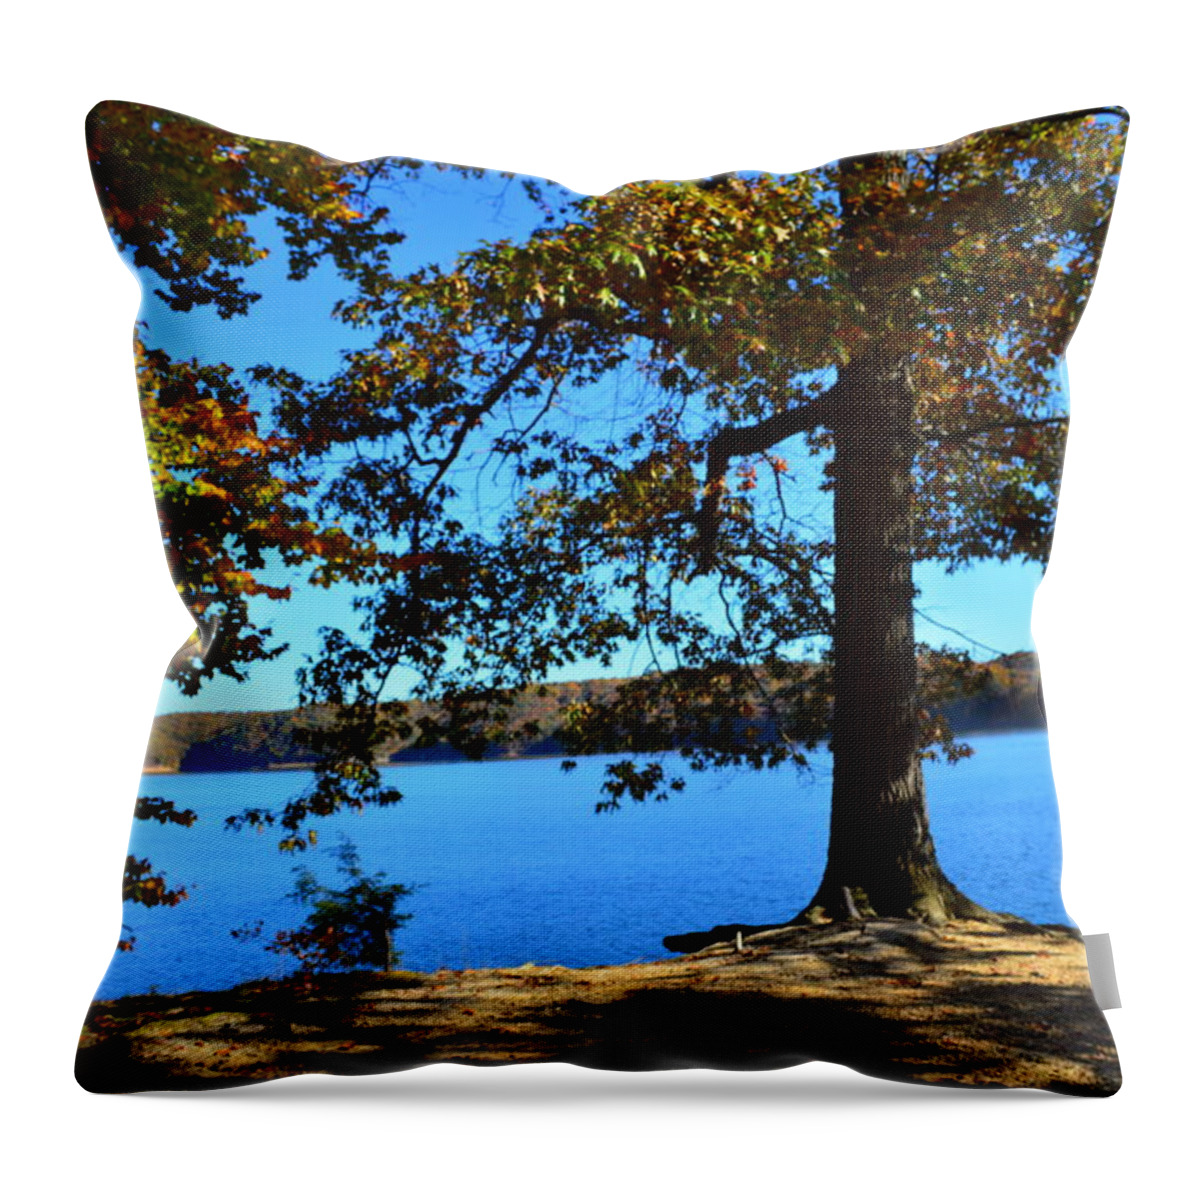 Autumn Trees Throw Pillow featuring the photograph Autumn Trees on Blue Lake by Stacie Siemsen